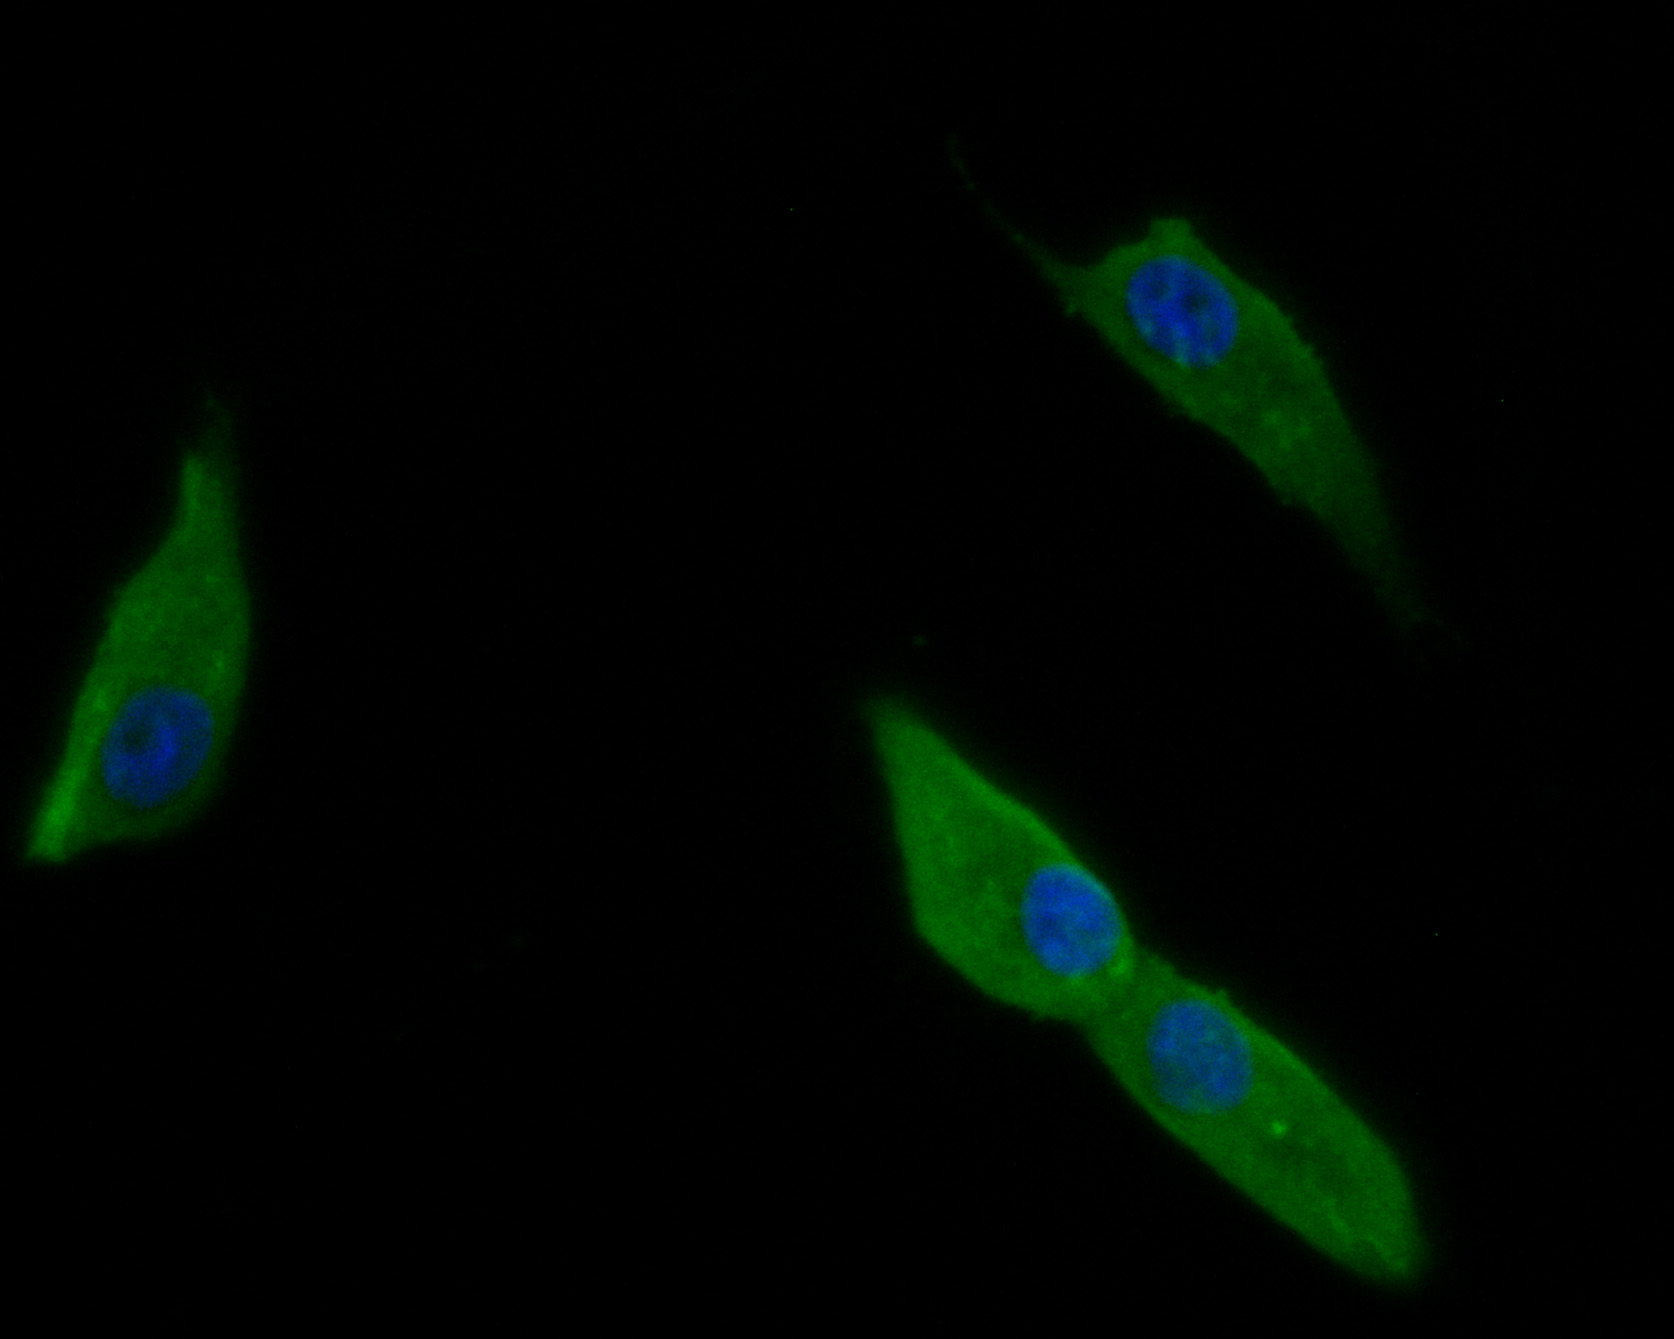 ICC staining of RGMA in MG-63 cells (green). Formalin fixed cells were permeabilized with 0.1% Triton X-100 in TBS for 10 minutes at room temperature and blocked with 1% Blocker BSA for 15 minutes at room temperature. Cells were probed with the primary antibody (HA500148, 1/200) for 1 hour at room temperature, washed with PBS. Alexa Fluor®488 Goat anti-Rabbit IgG was used as the secondary antibody at 1/1,000 dilution. The nuclear counter stain is DAPI (blue).